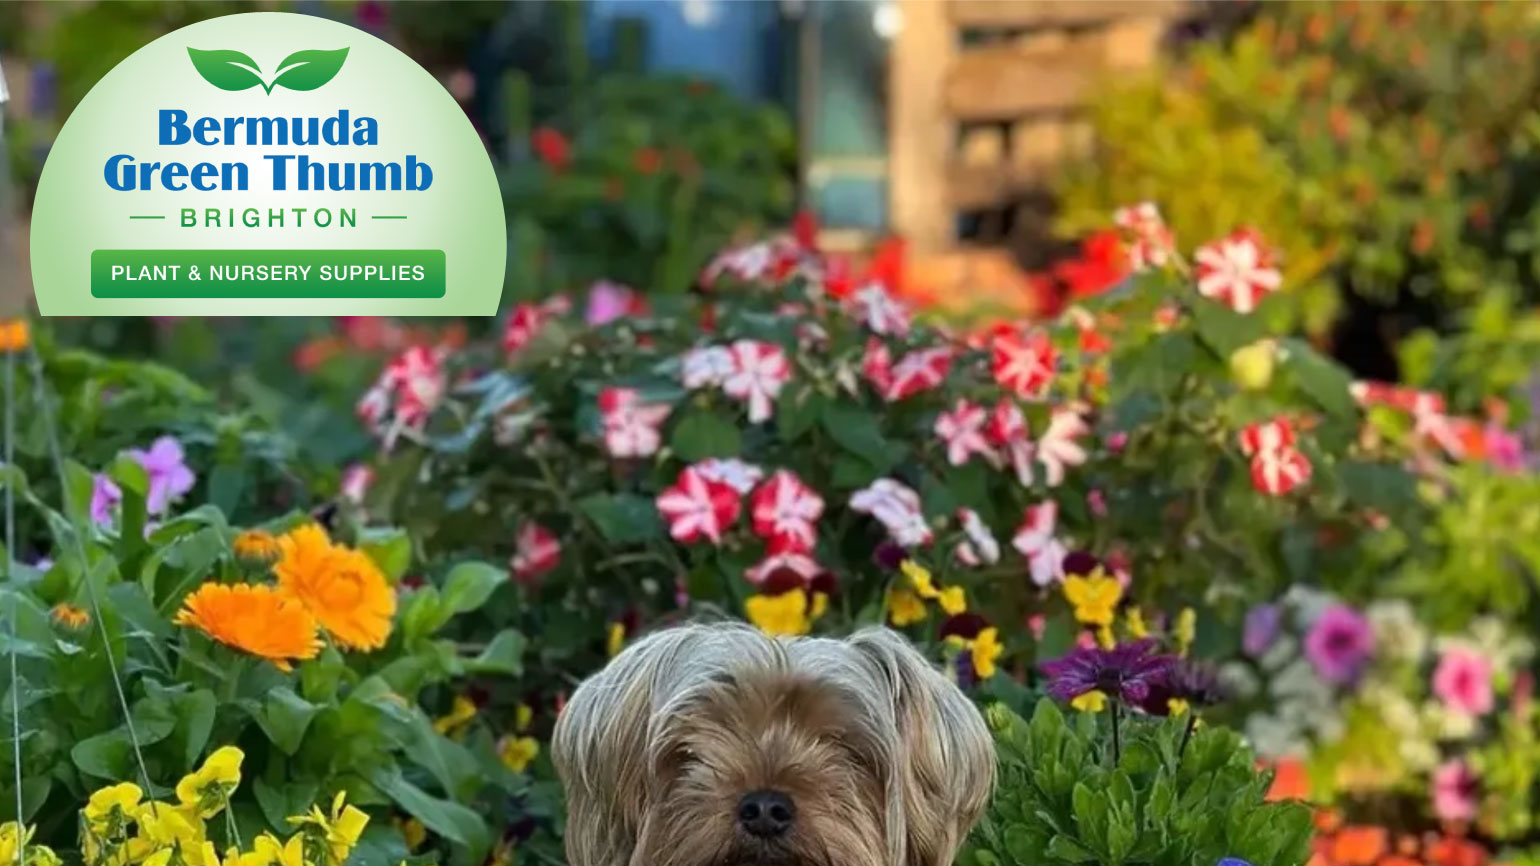 Life is better in the garden with Bermuda Green Thumb